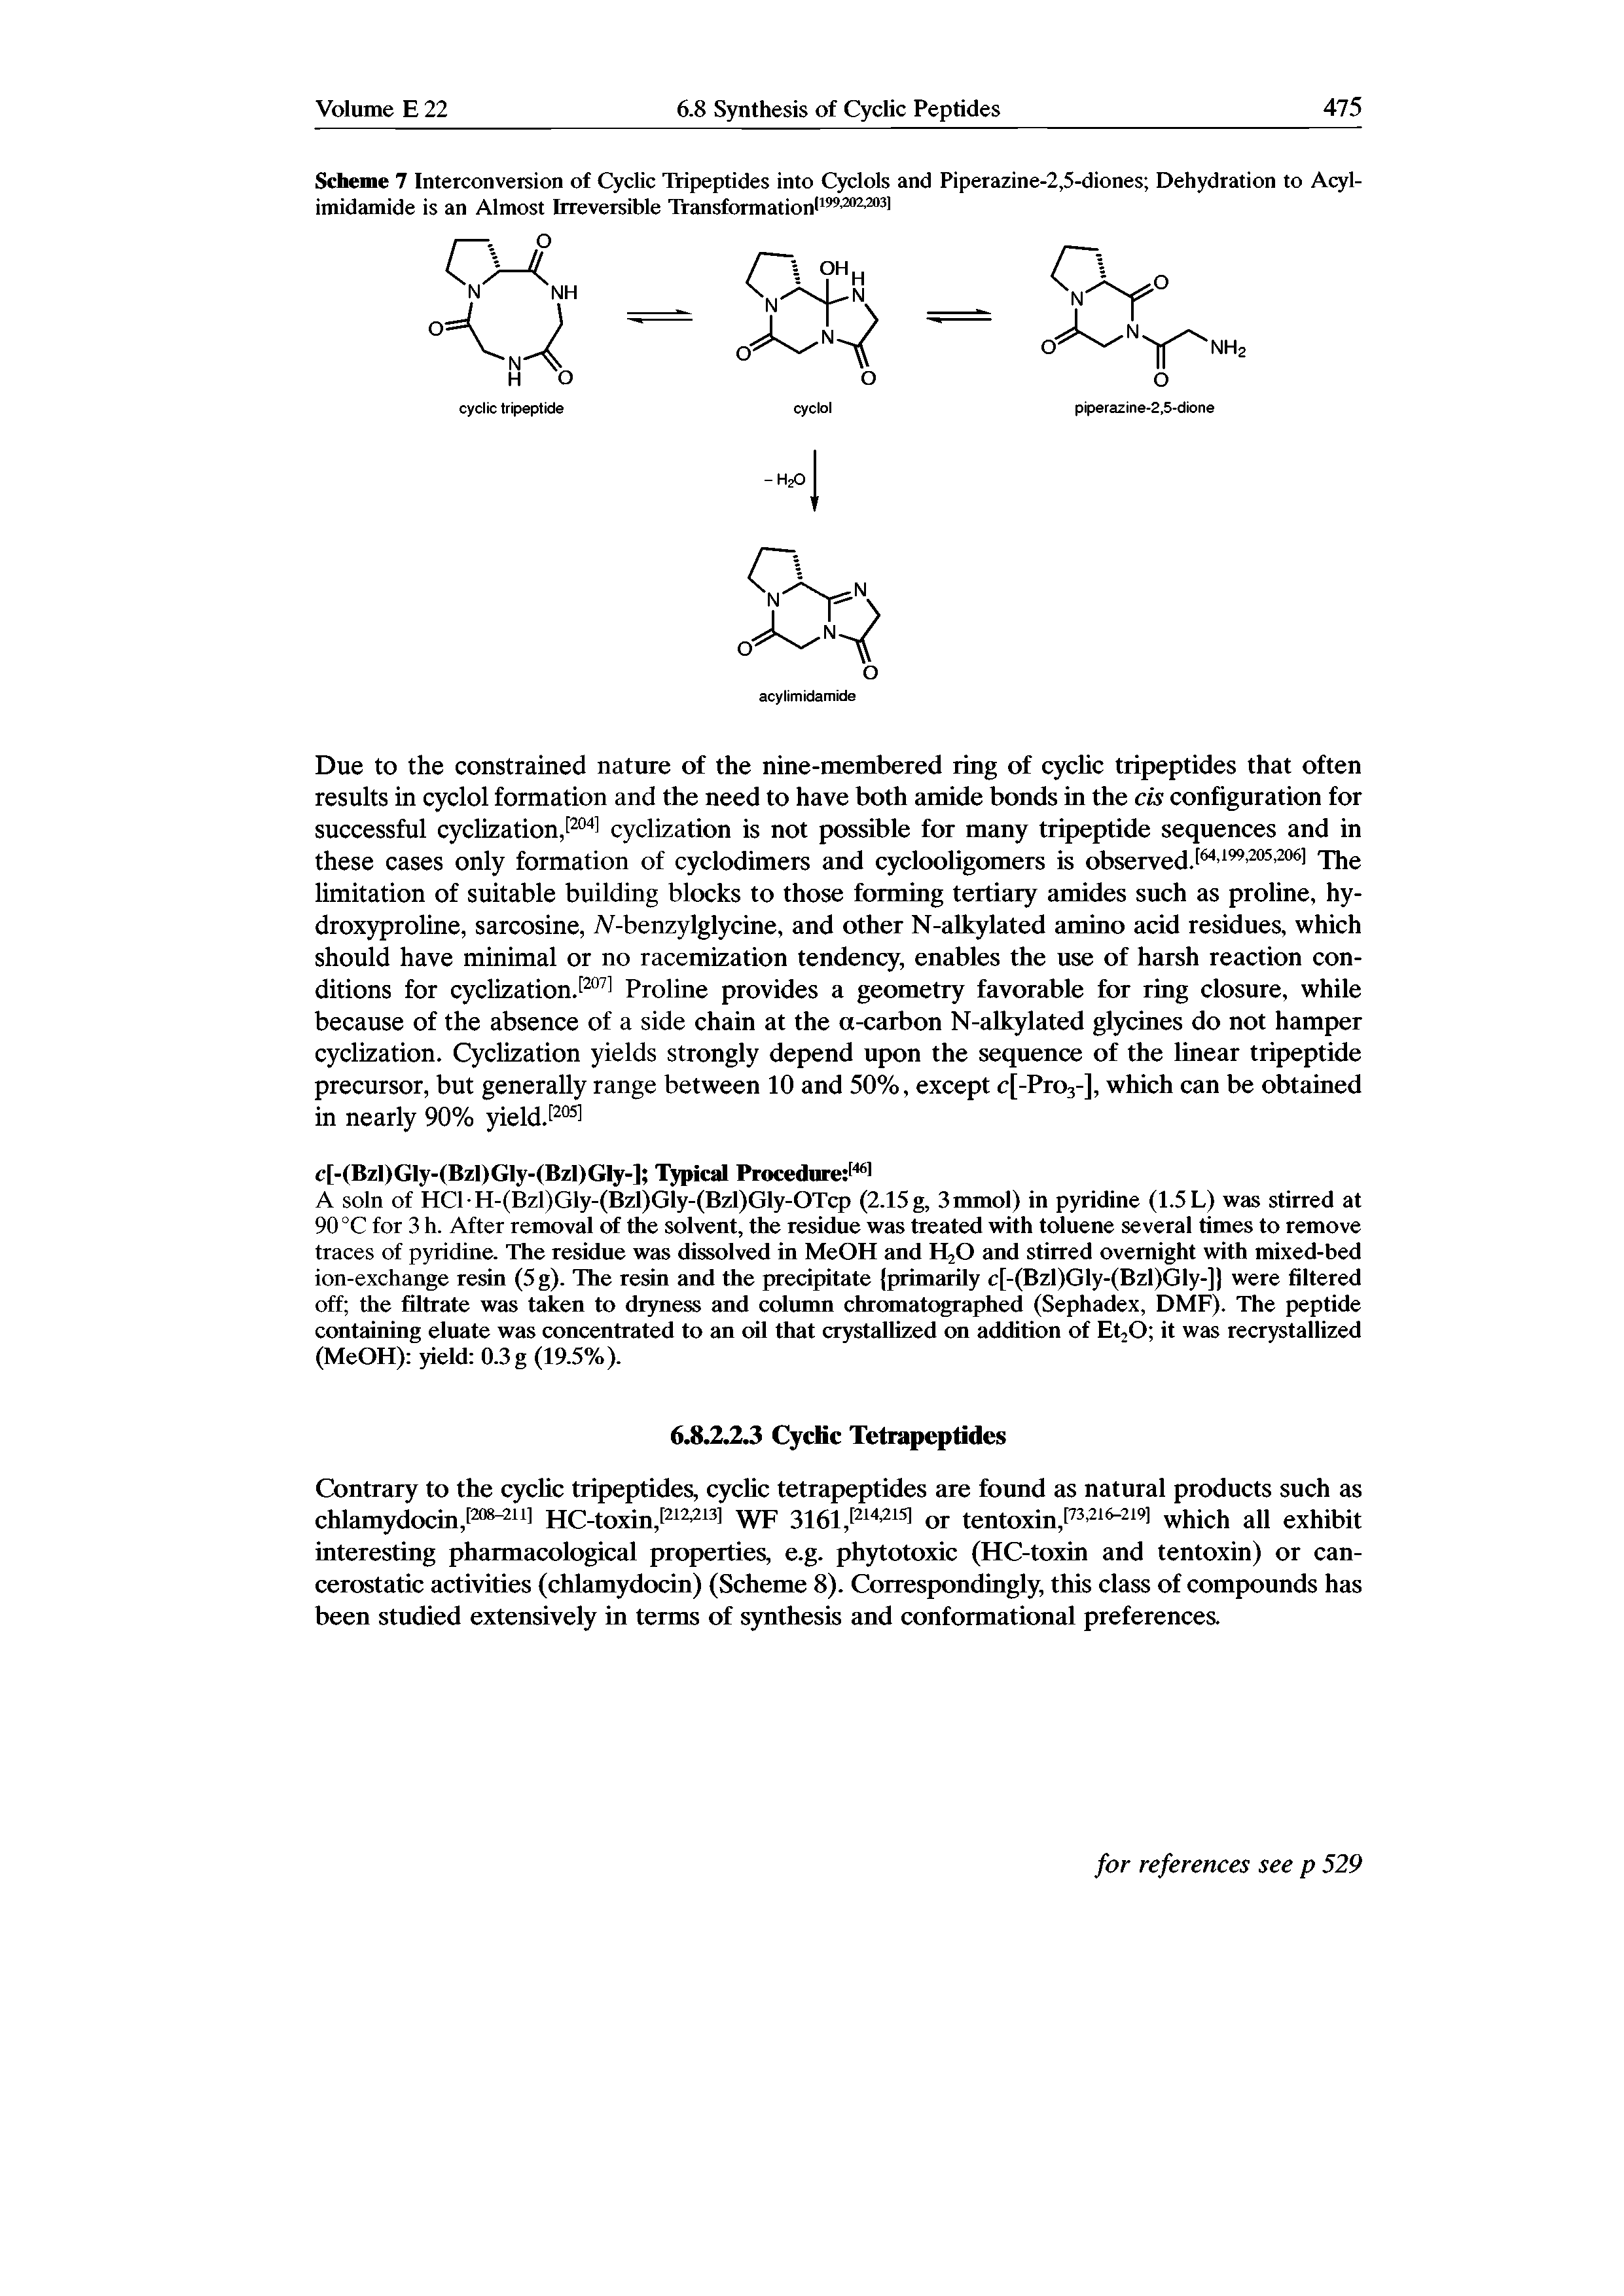 Scheme 7 Interconversion of Cyclic Tripeptides into Cyclols and Piperazine-2,5-diones Dehydration to Acyl-imidamide is an Almost Irreversible Transformation1199-202-2031...